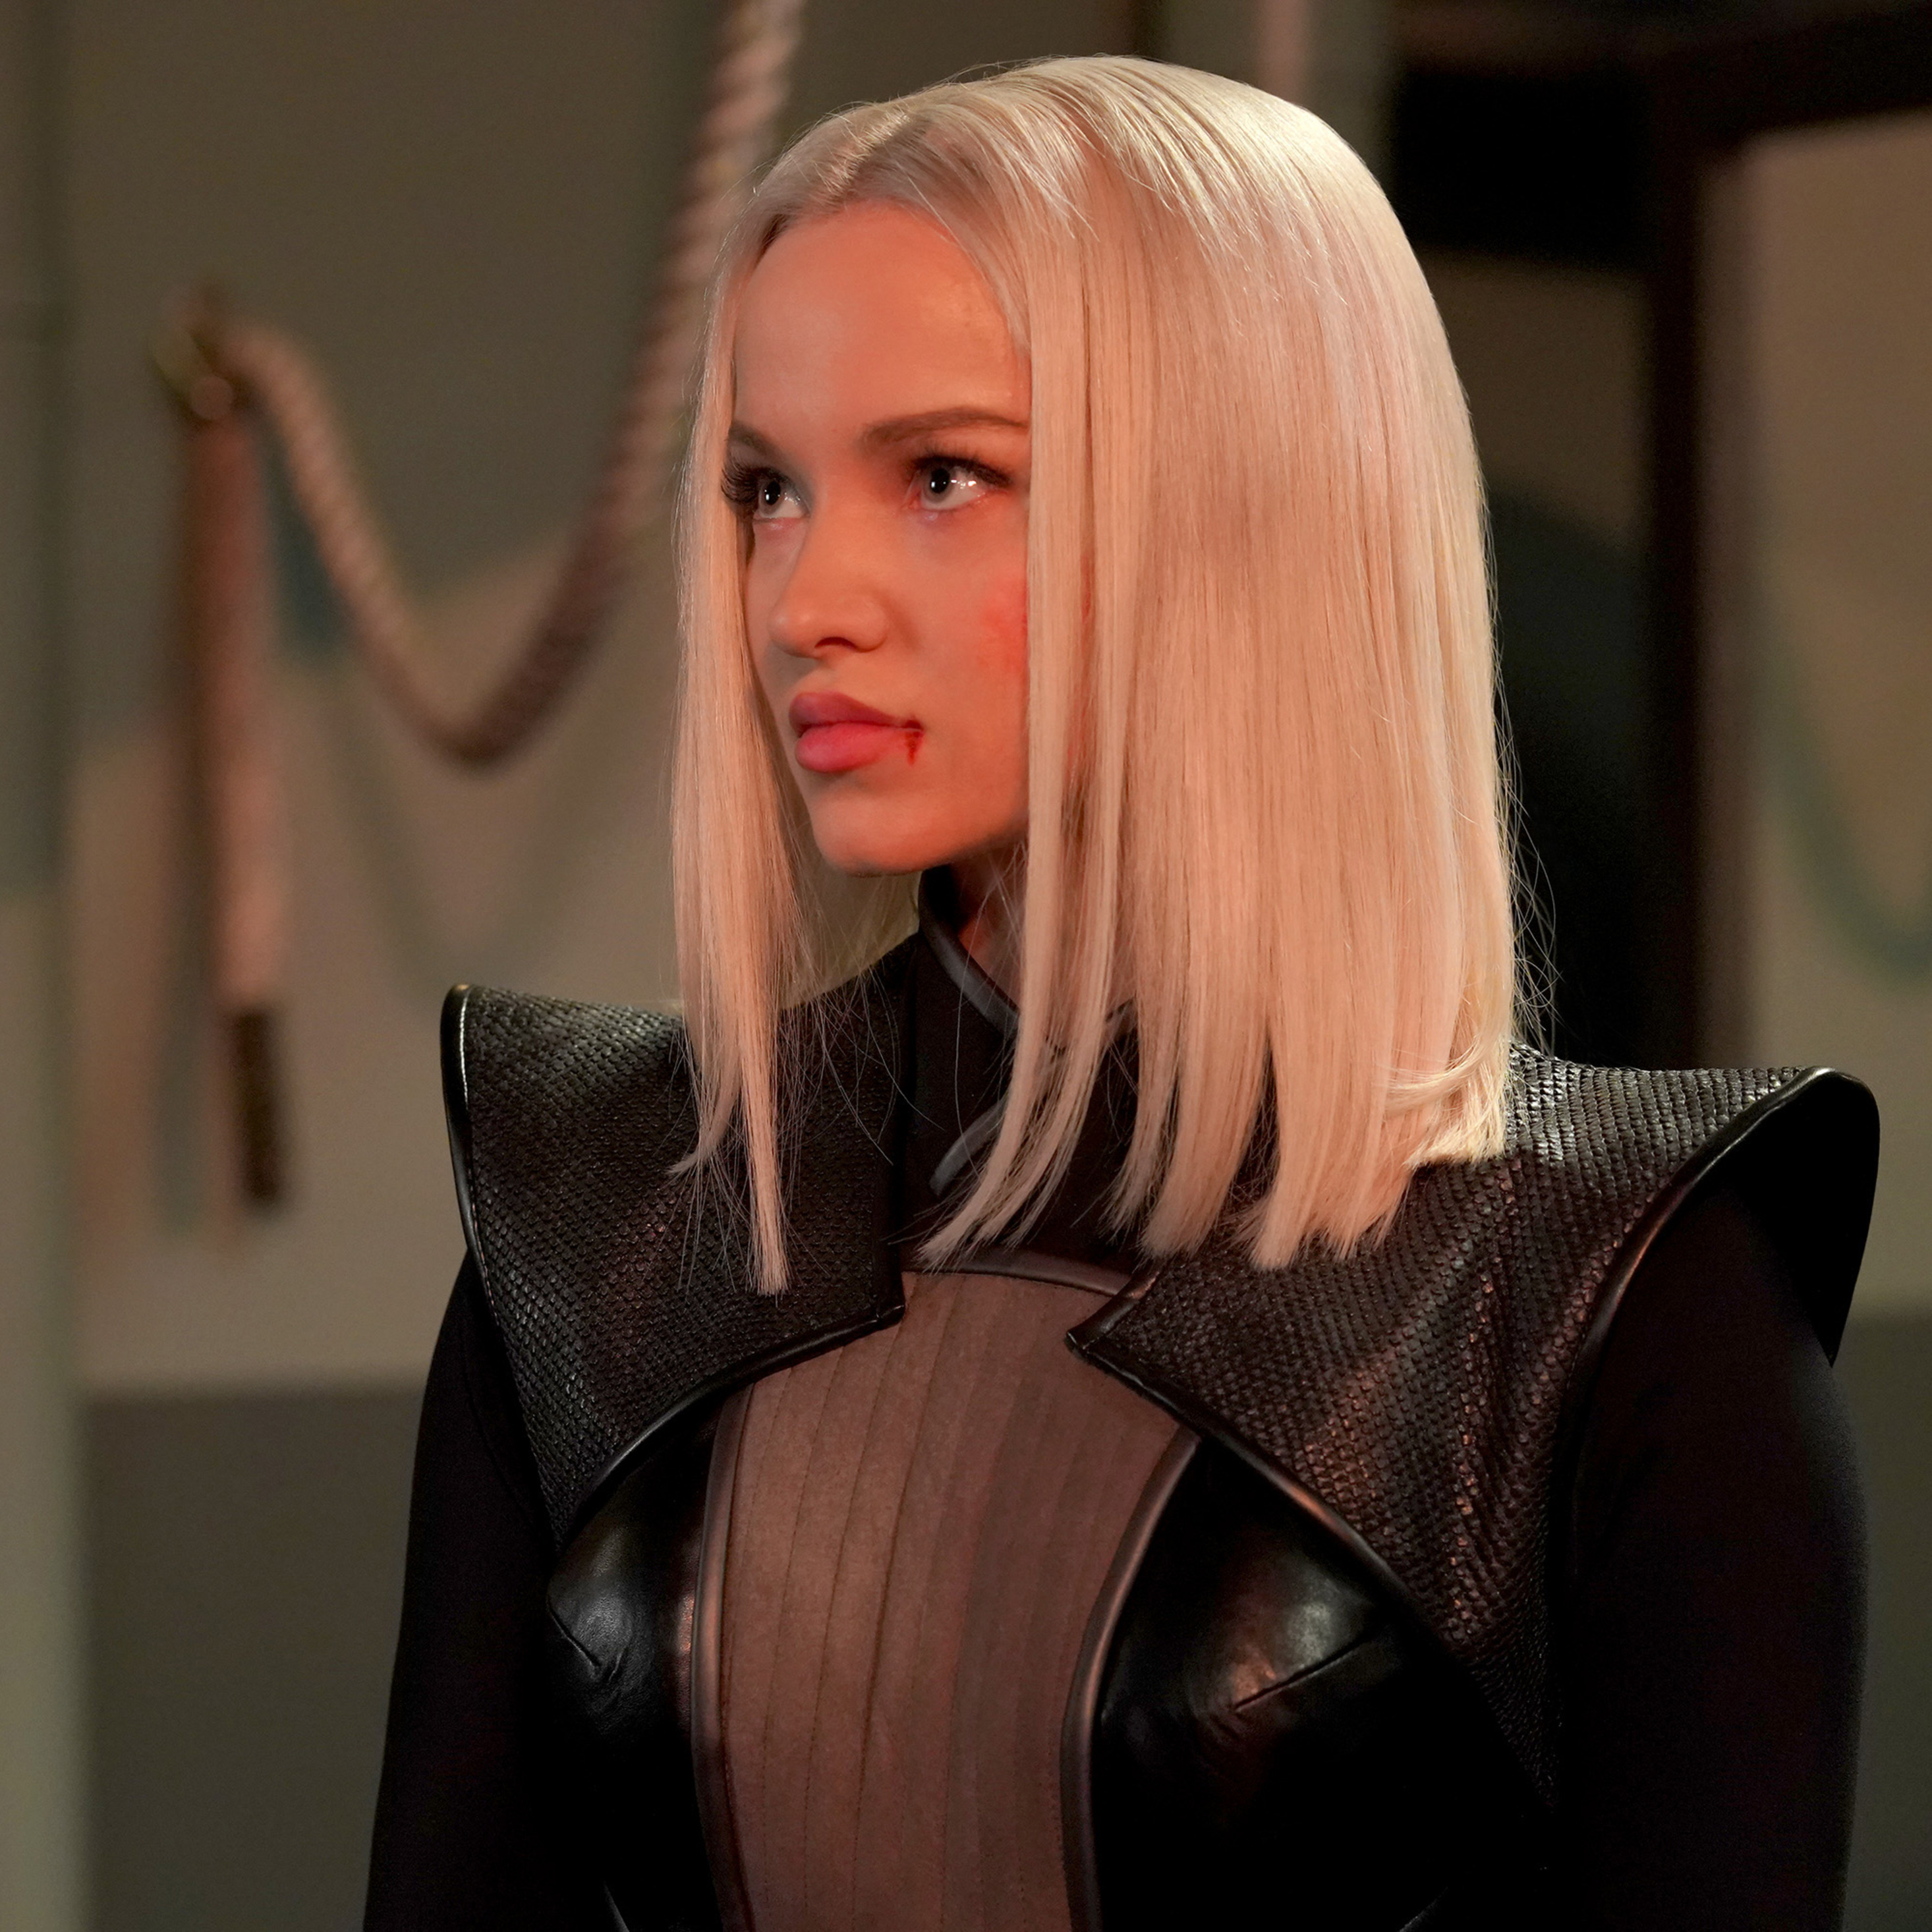 dove-cameron-in-agents-of-shield-g9.jpg. 